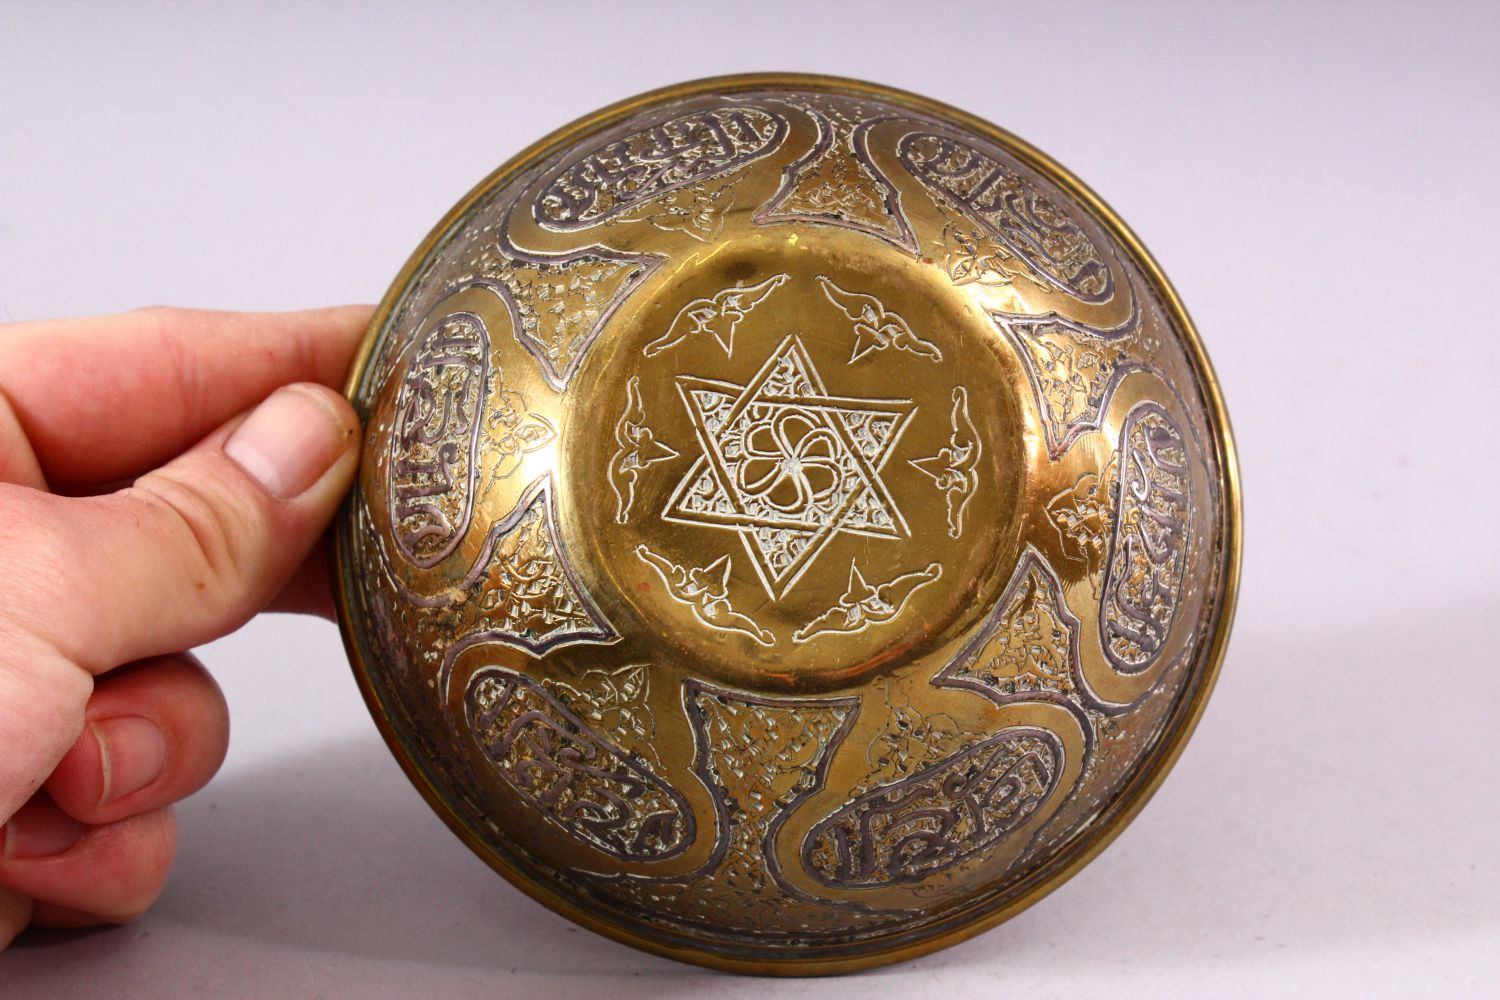 A SMALL ISLAMIC CIRCULAR BRASS BOWL with silver inlaid and engraved decoration, 13cm diameter. - Image 4 of 4